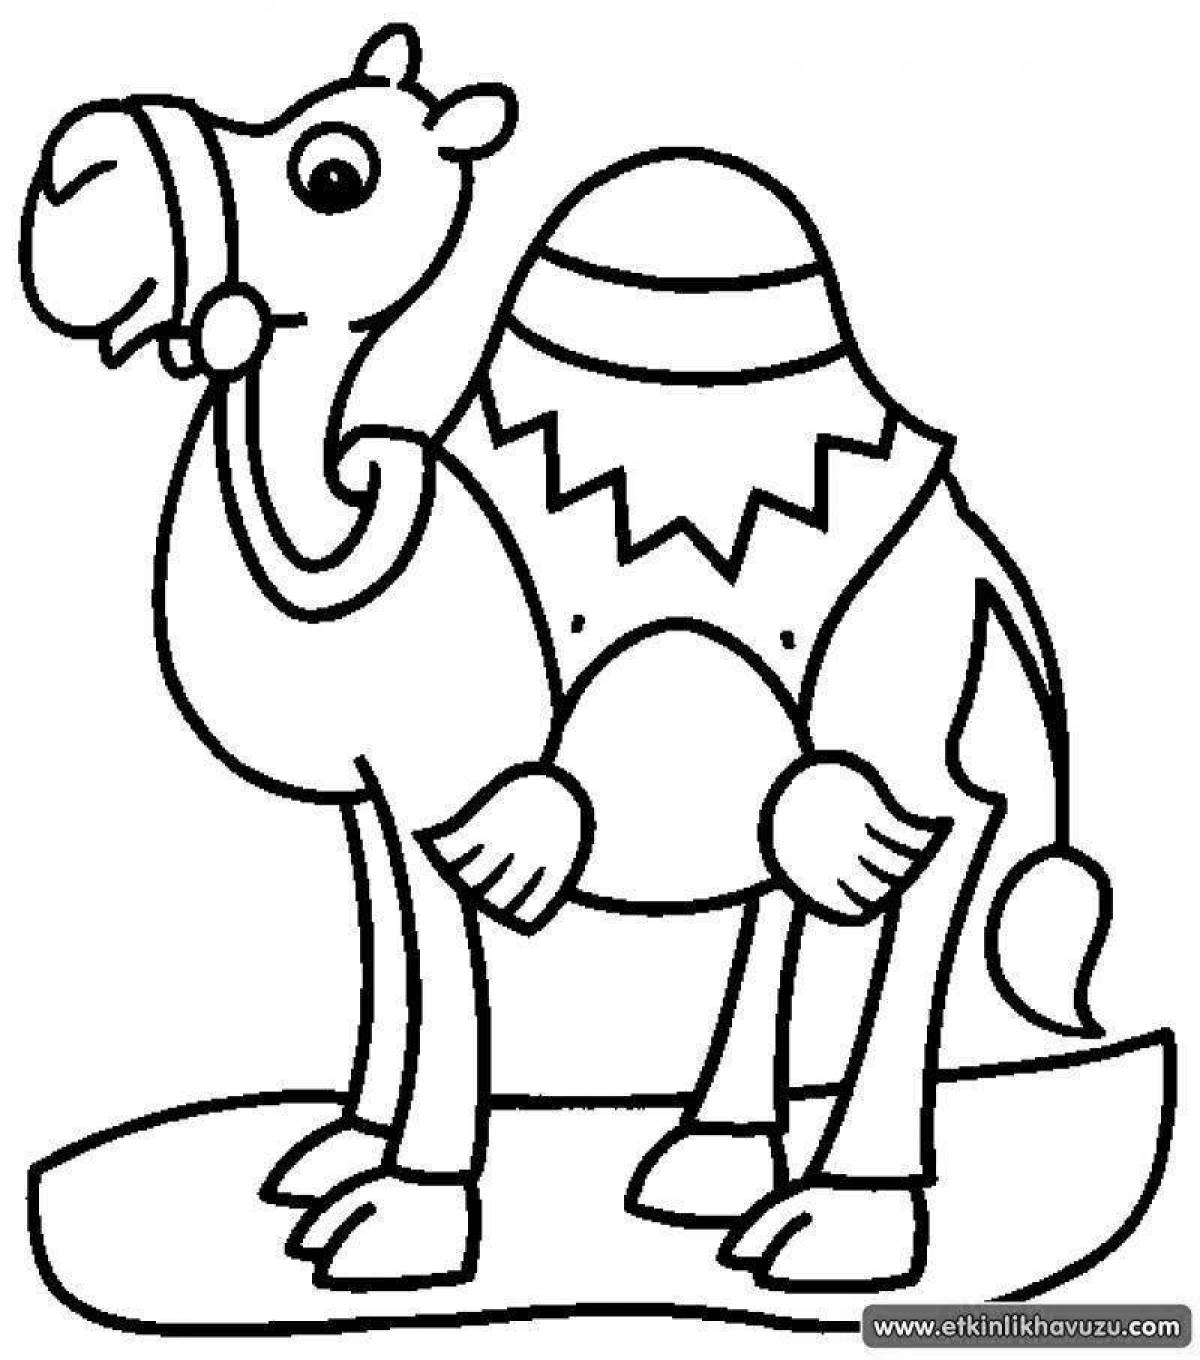 Colorful camel coloring page for kids